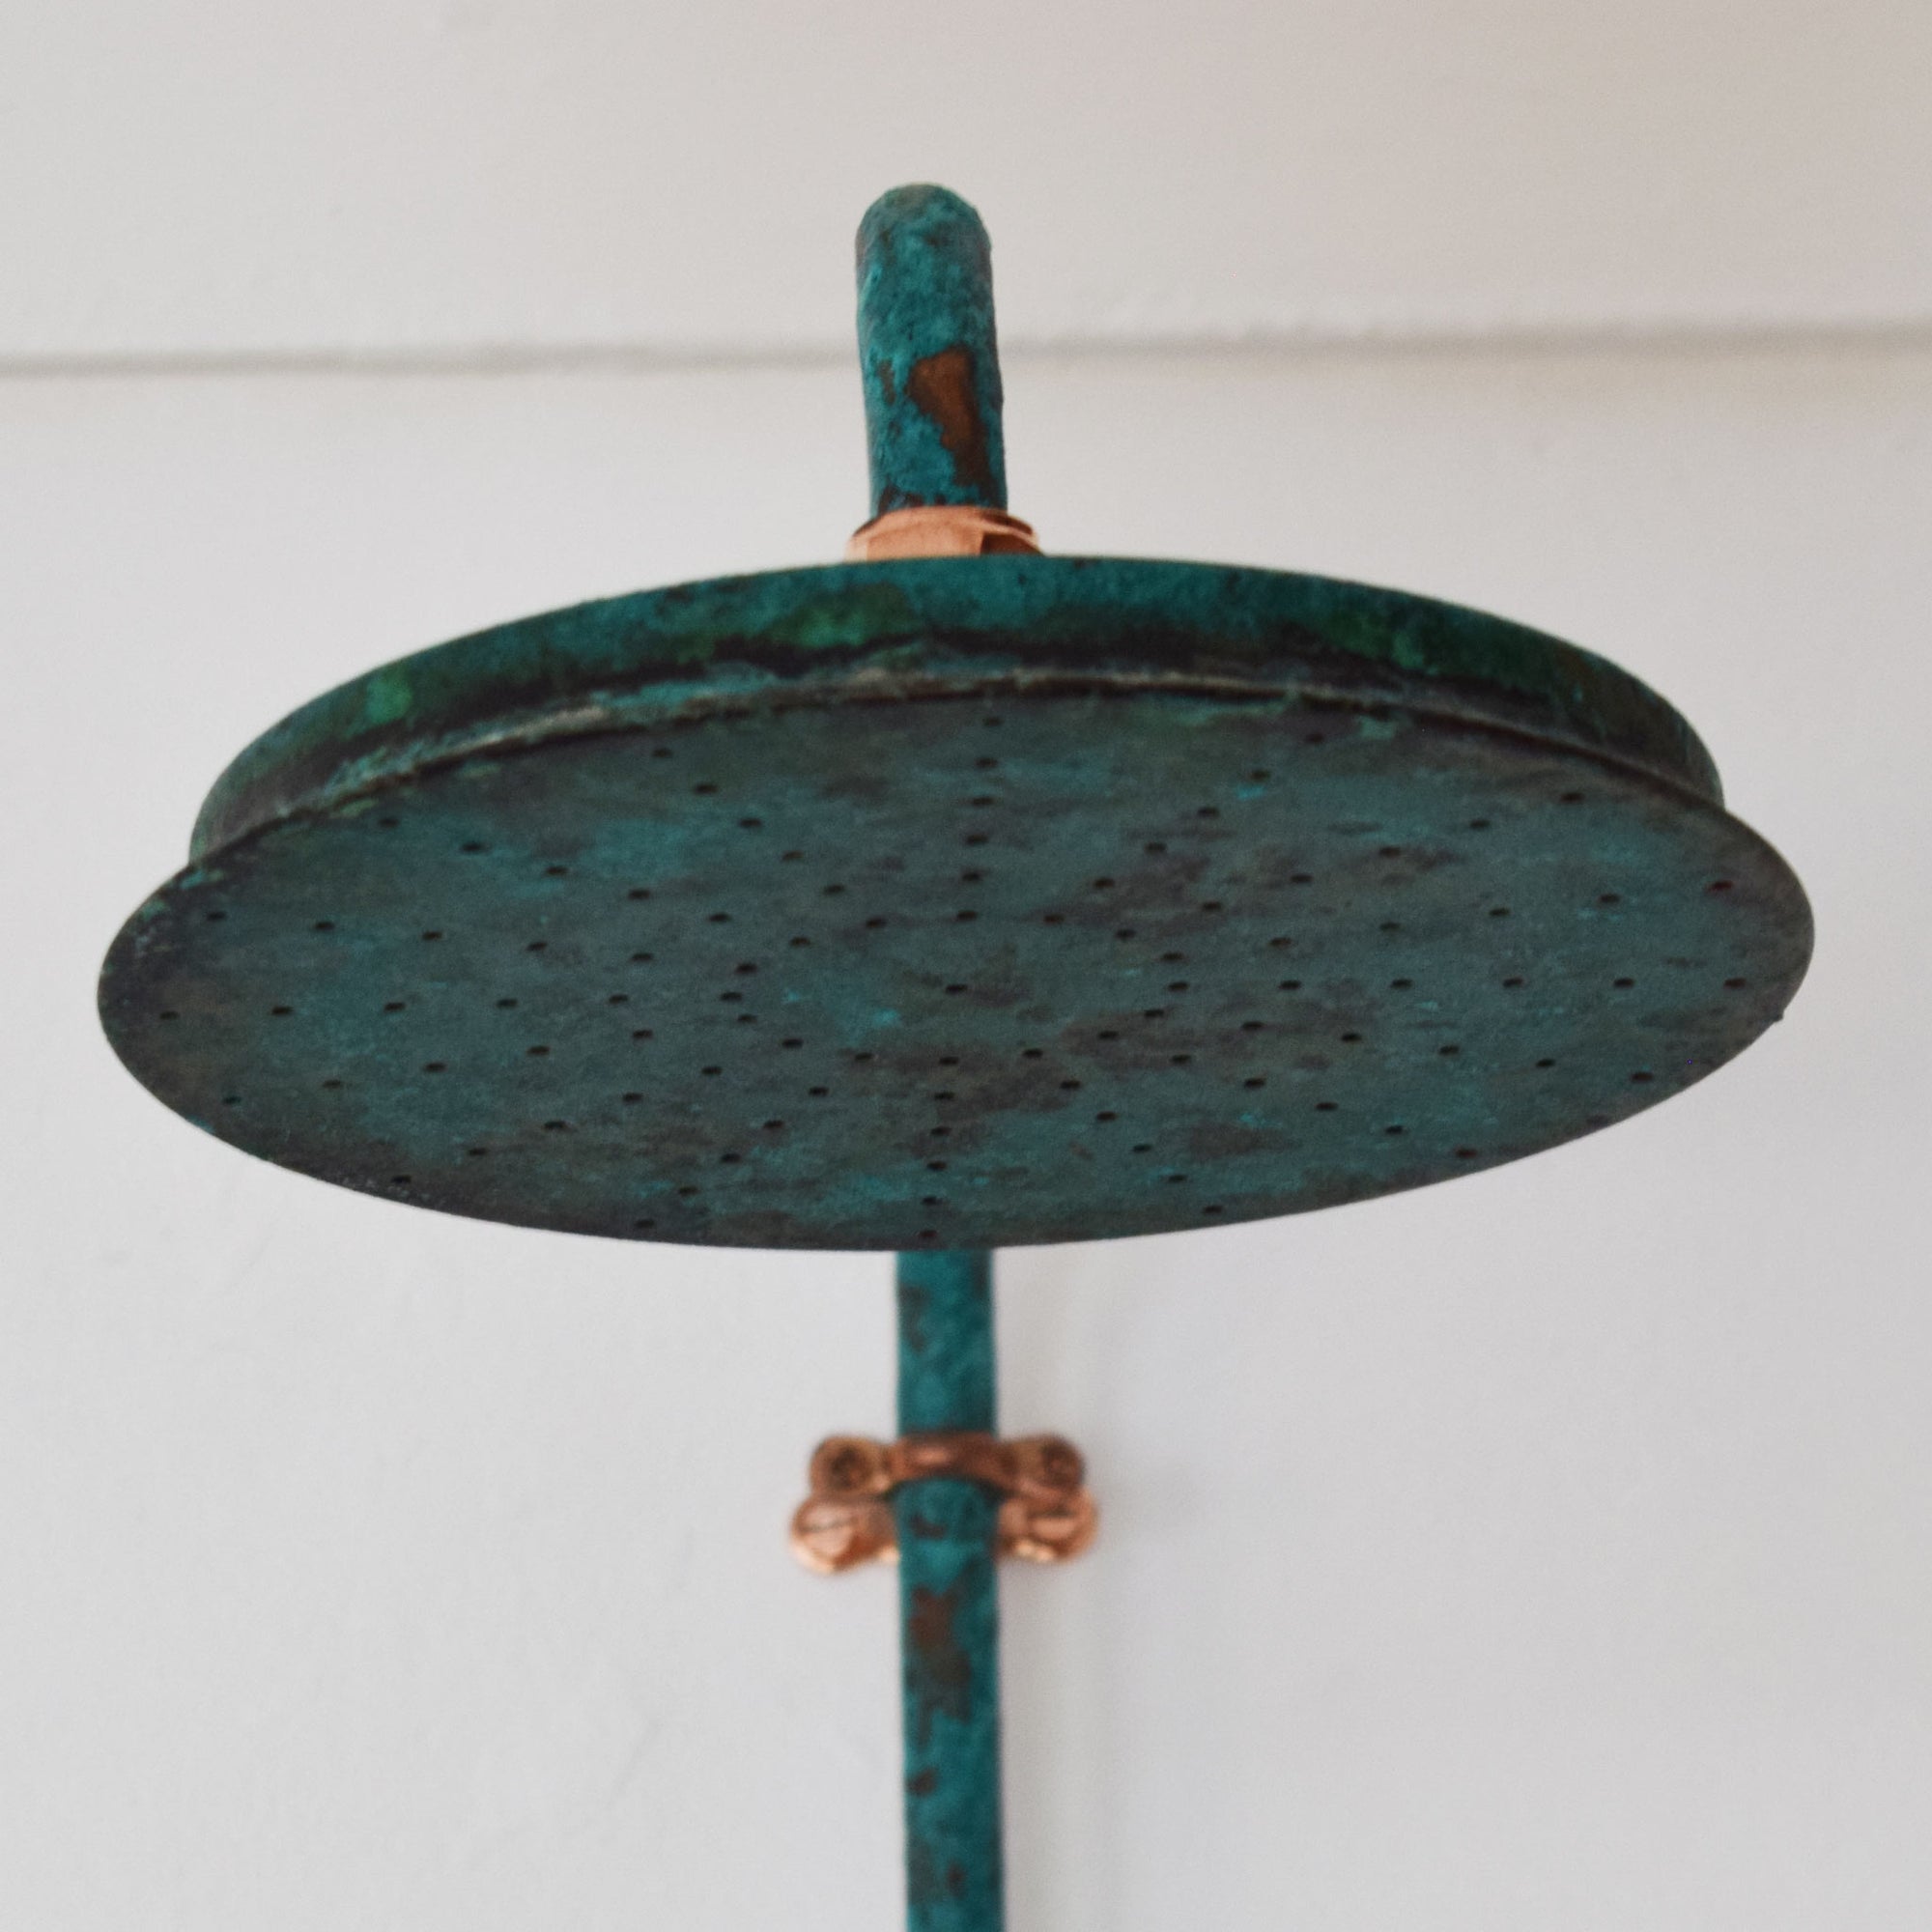 Close up of a verdigris finish shower head with polished copper